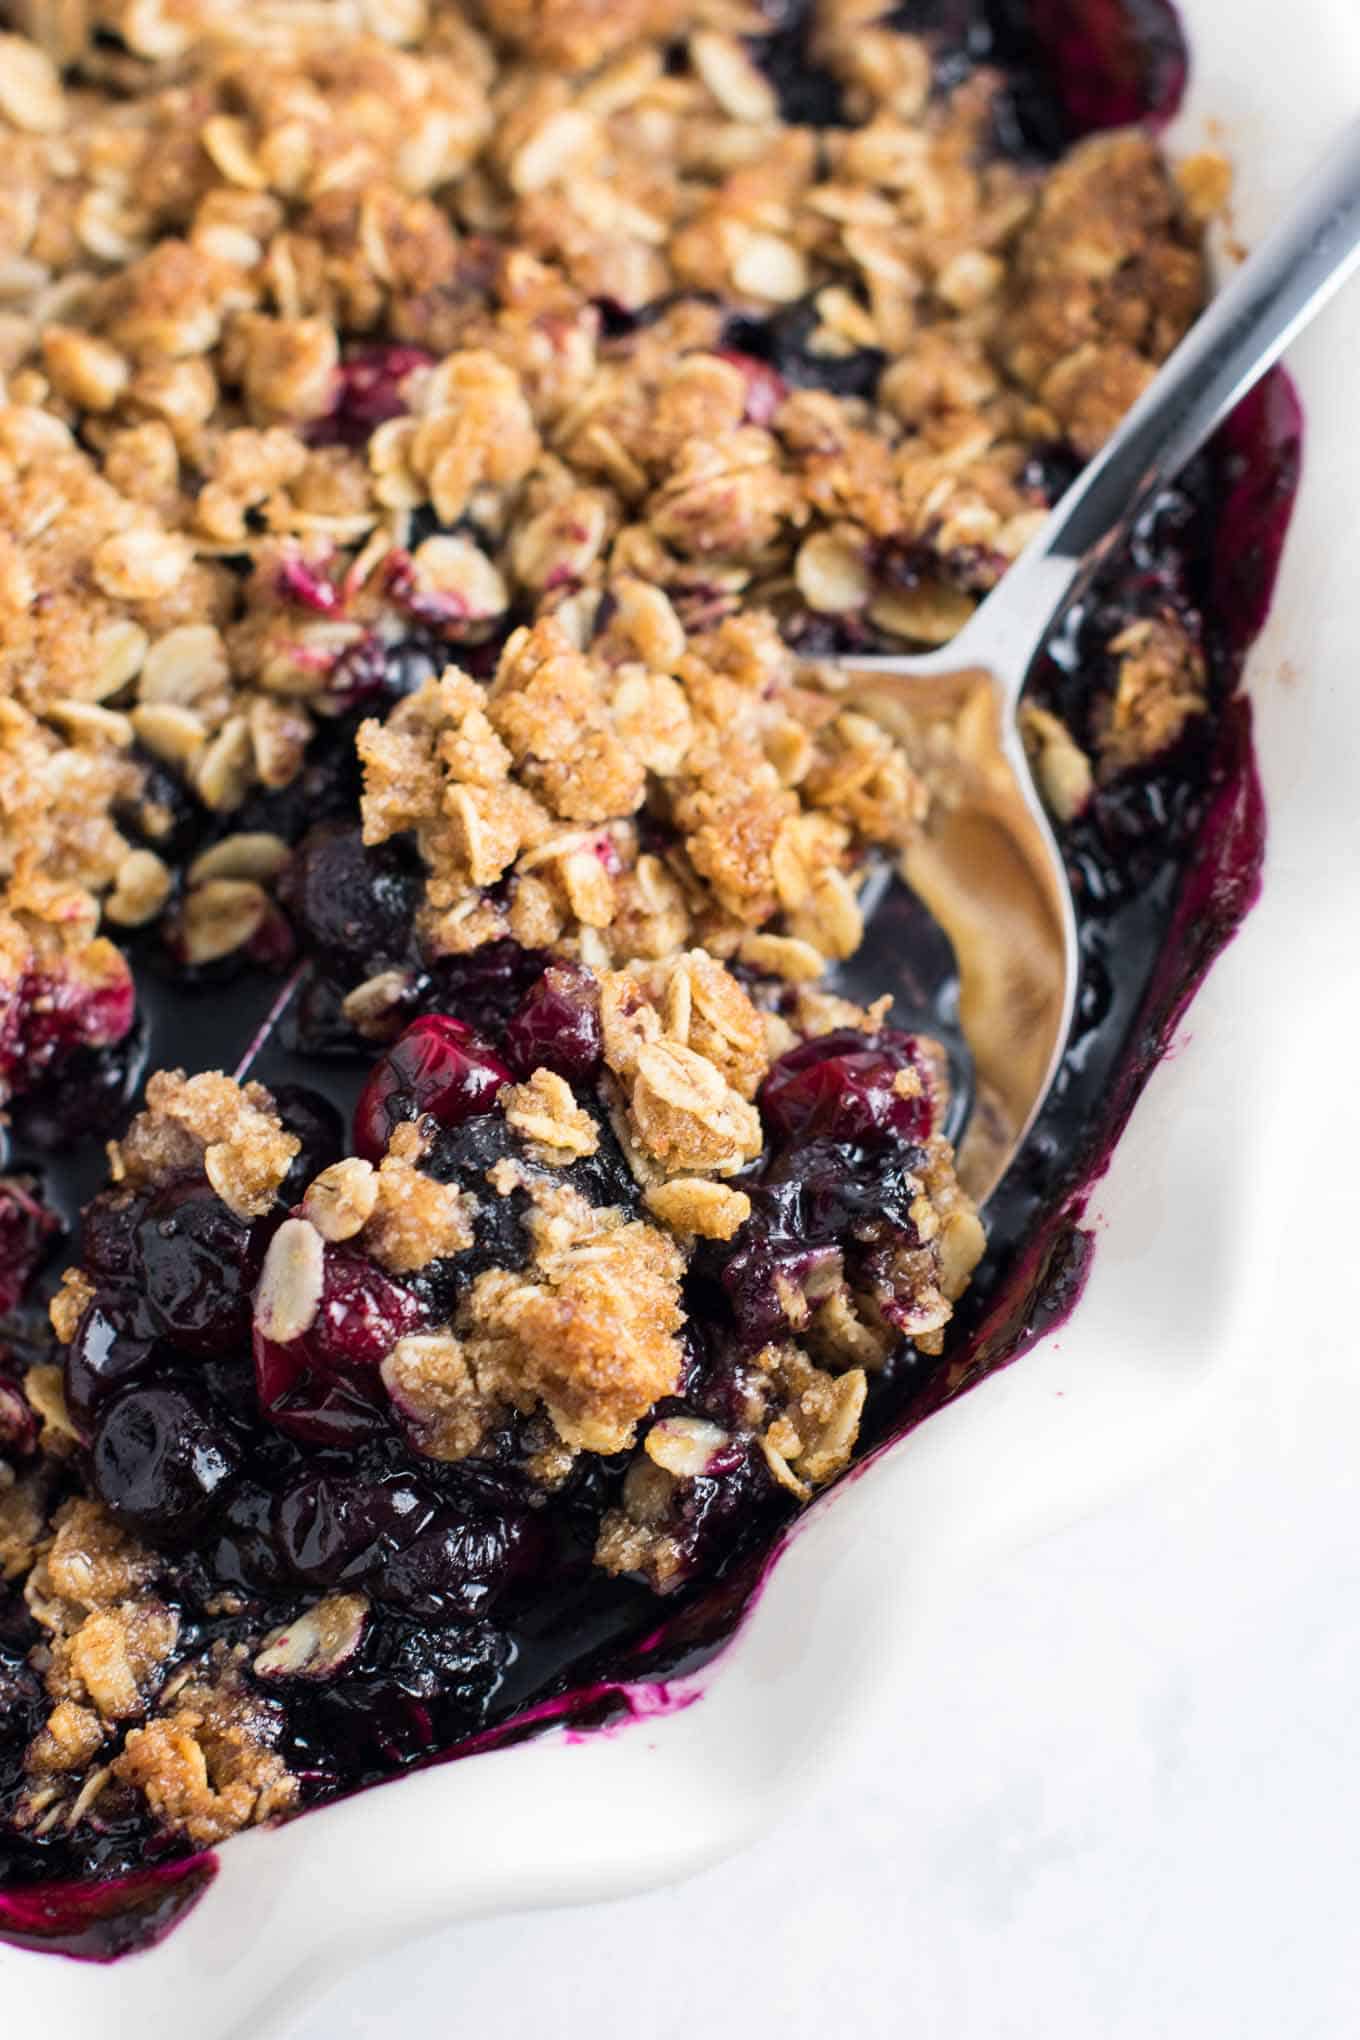 vegetarian thanksgiving menu - This Cranberry Blueberry Crisp recipe is packed full of flavor and ready for the oven in less than 15 minutes! Gluten free and vegan. #cranberryblueberrycrisp #cranberry #dessert #vegan #glutenfree